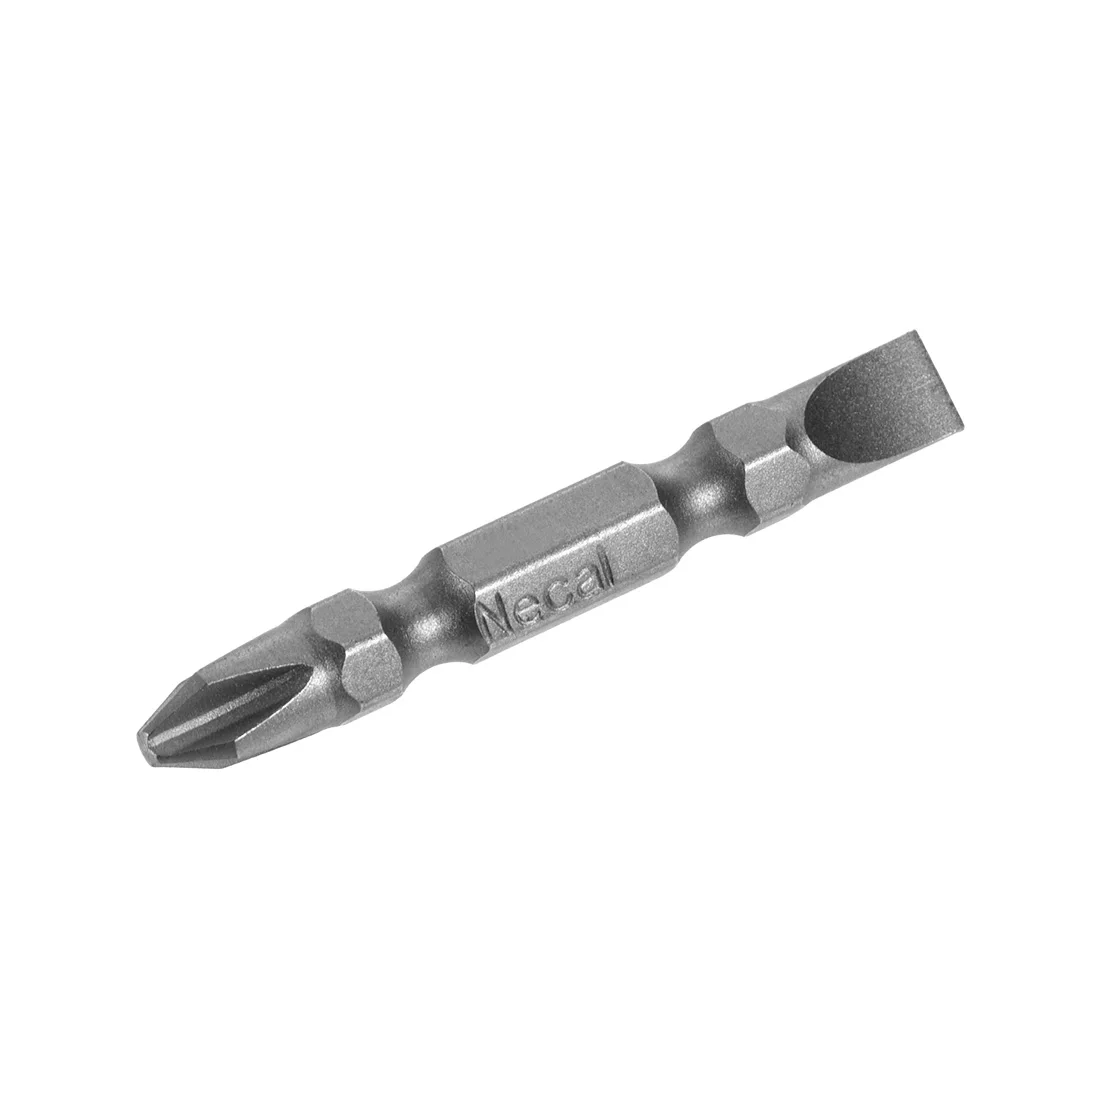 

uxcell 1/4inch Hex Shank 50mm Length Magnetic Screwdriver SL6/PH2 Slotted-Phillips Double-Head Screwdriver Bits S2 Alloy Steel